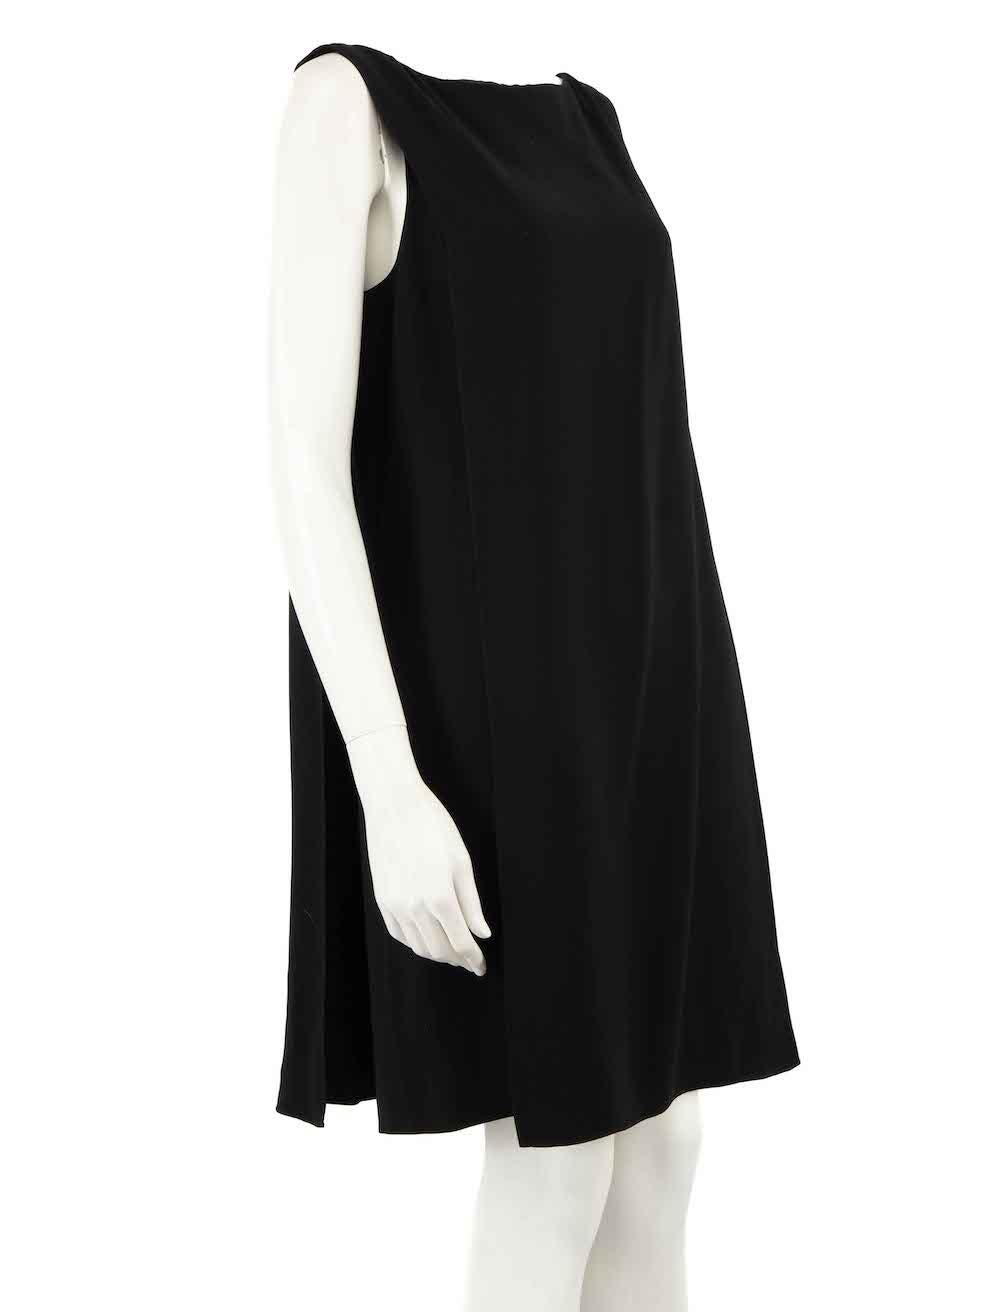 CONDITION is Very good. Minimal wear to dress is evident. Minimal wear to the front under-layer with a small pluck to the weave. The belt is also missing on this used Ralph Lauren Black Label designer resale item.
 
 
 
 Details
 
 
 Black
 
